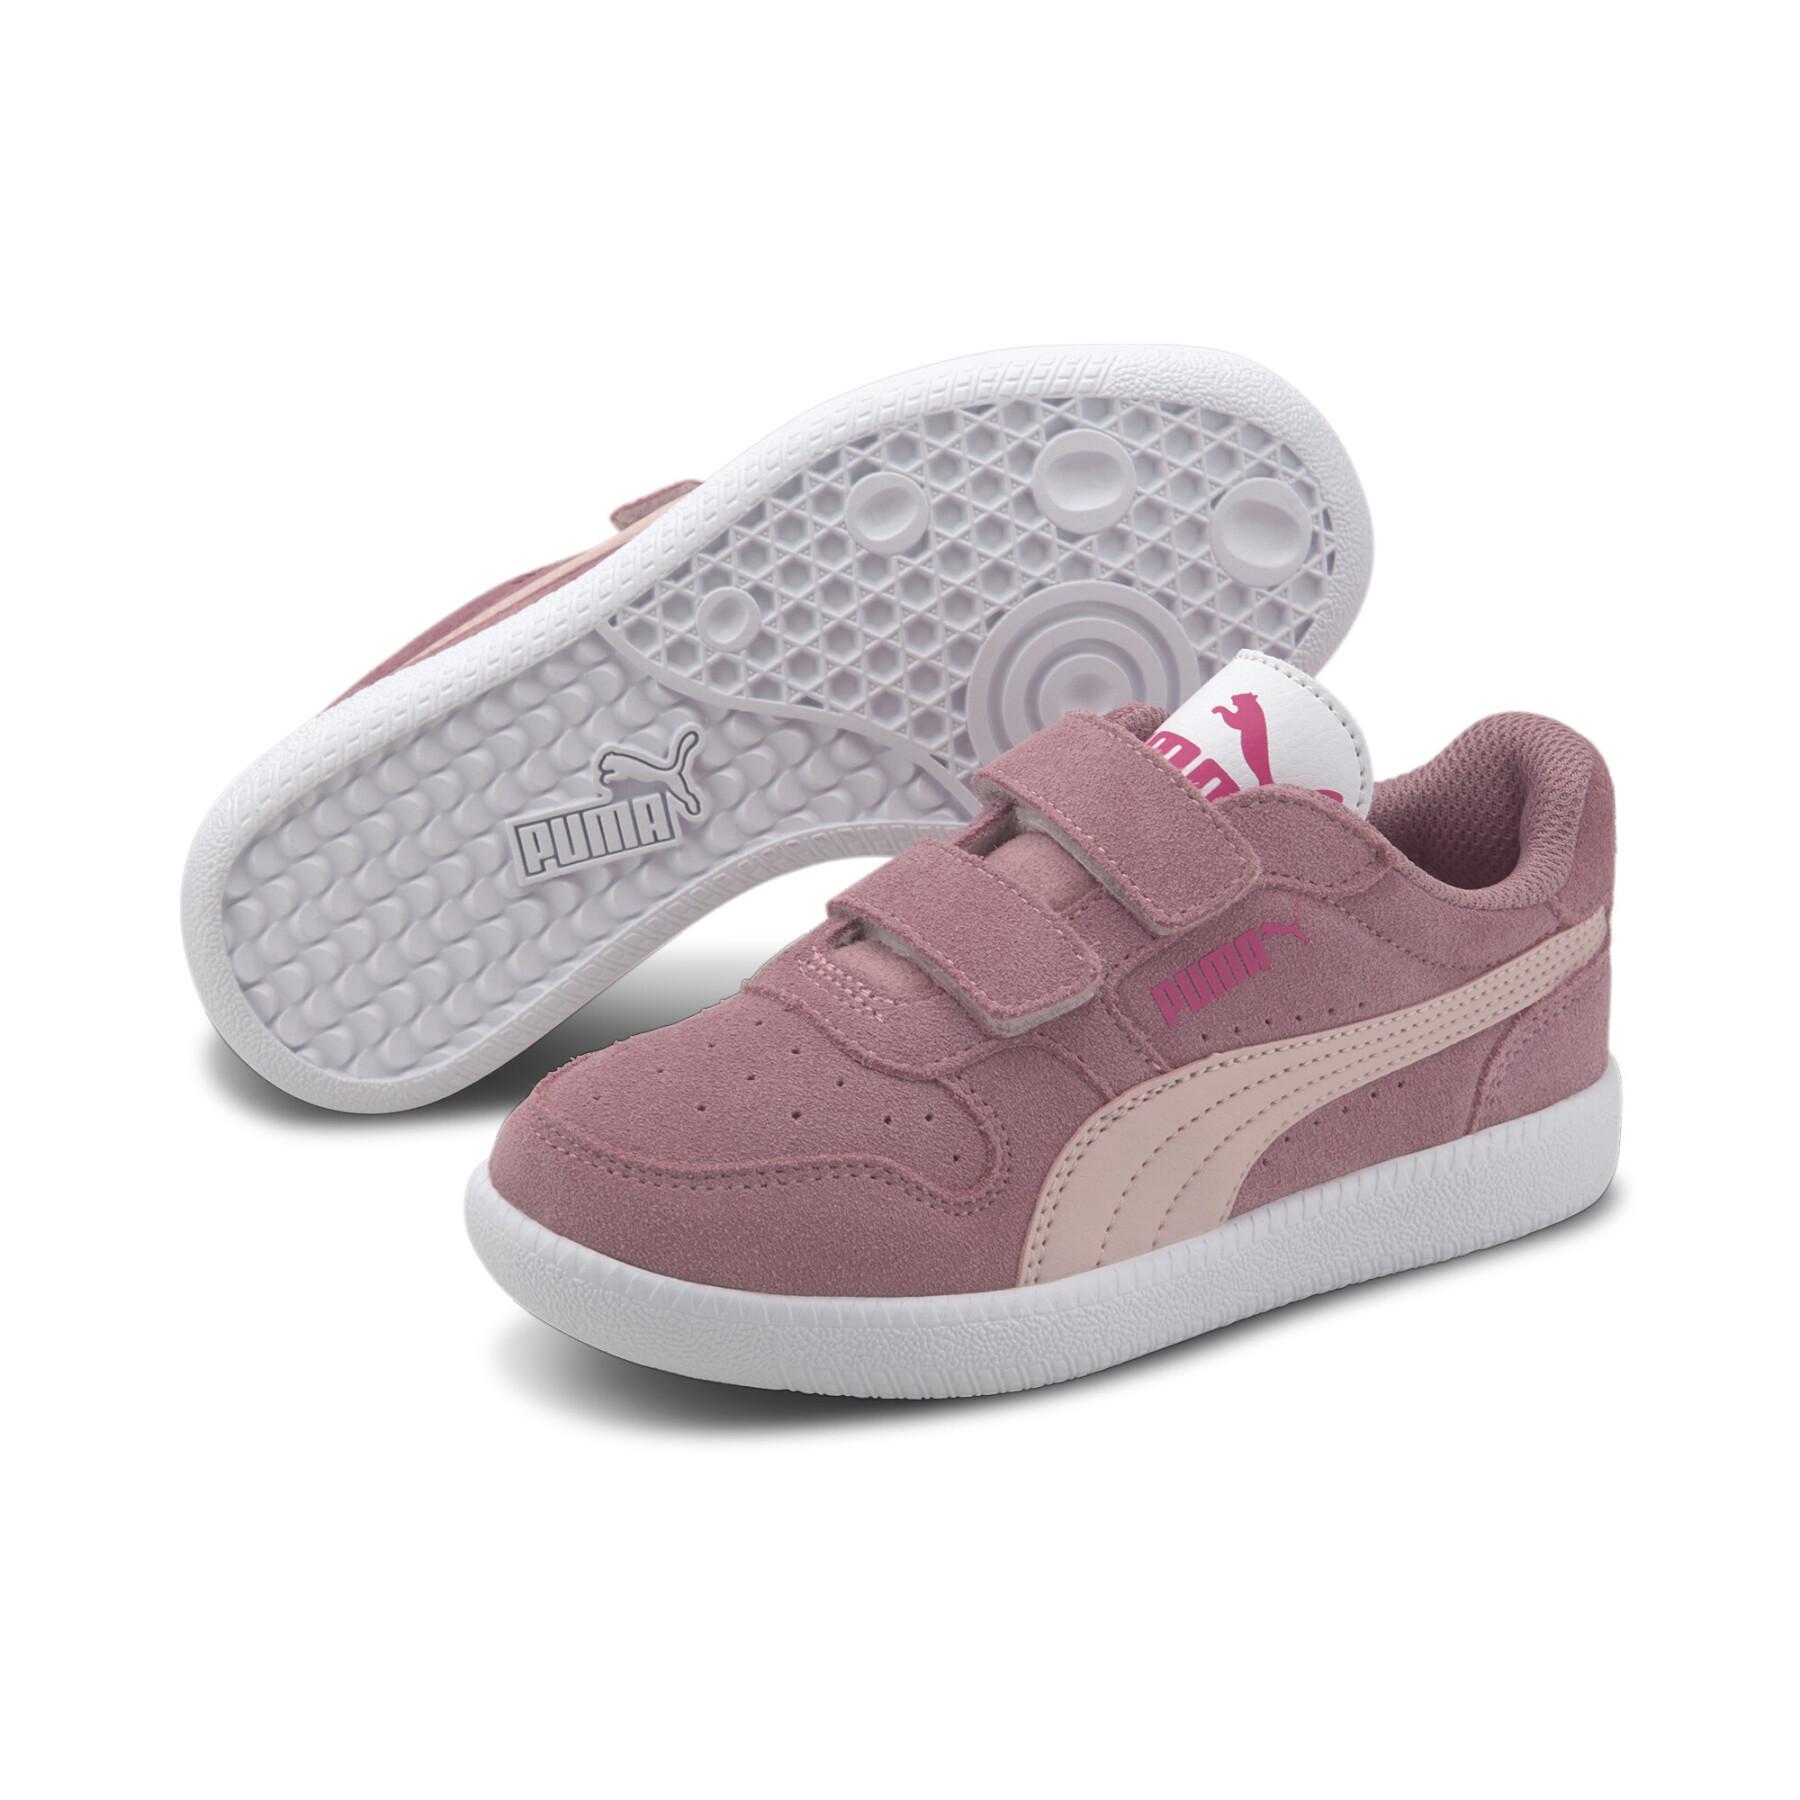 Children's sneakers Puma Icra Trainer SD V PS